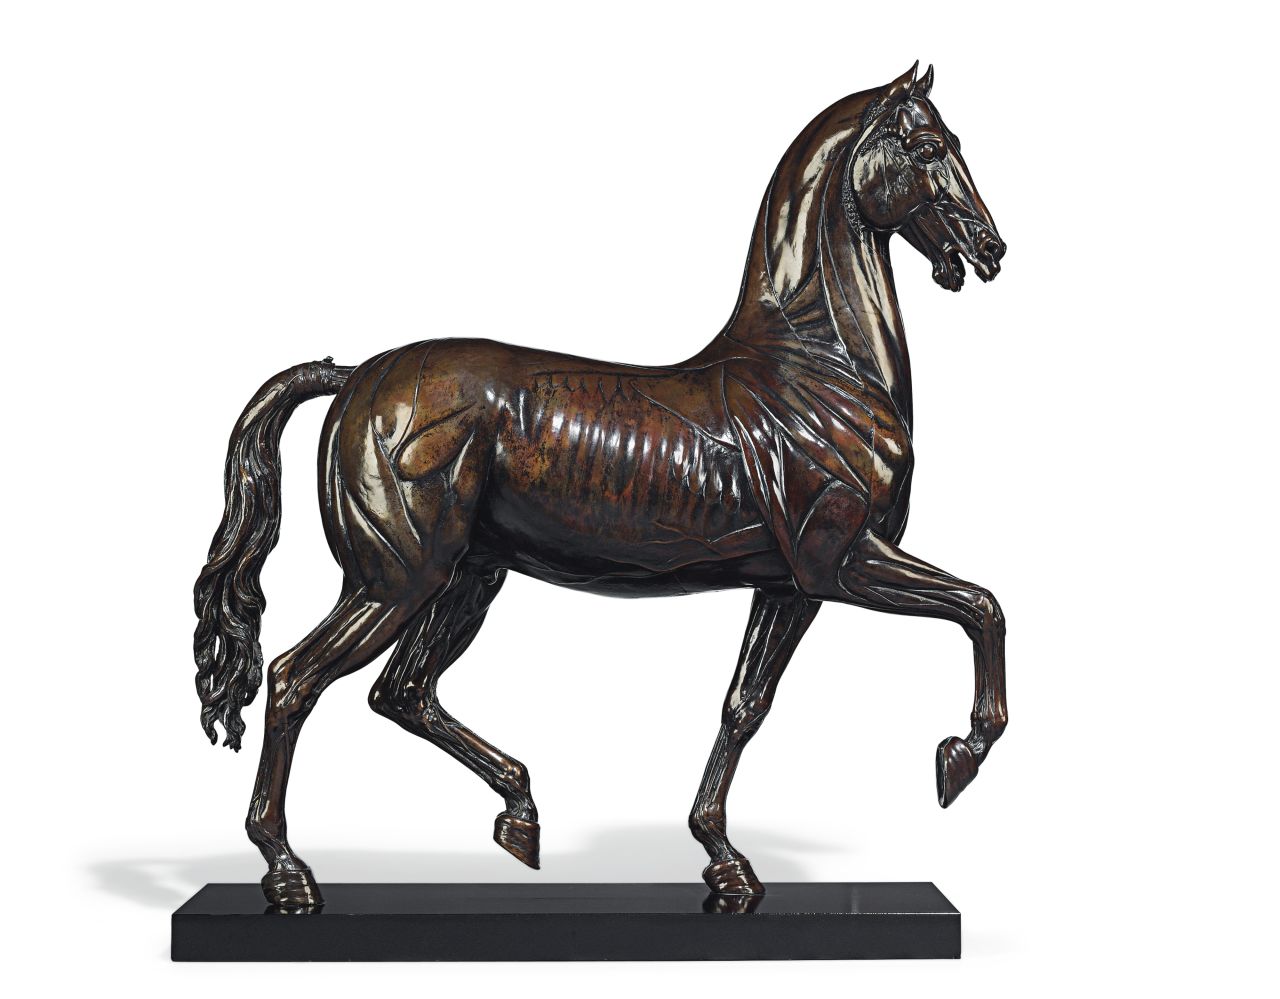 This bronze model of an Echoche Horse made by Giuseppe Valadier (1762-1839) is worth an estimated $2,142,554.